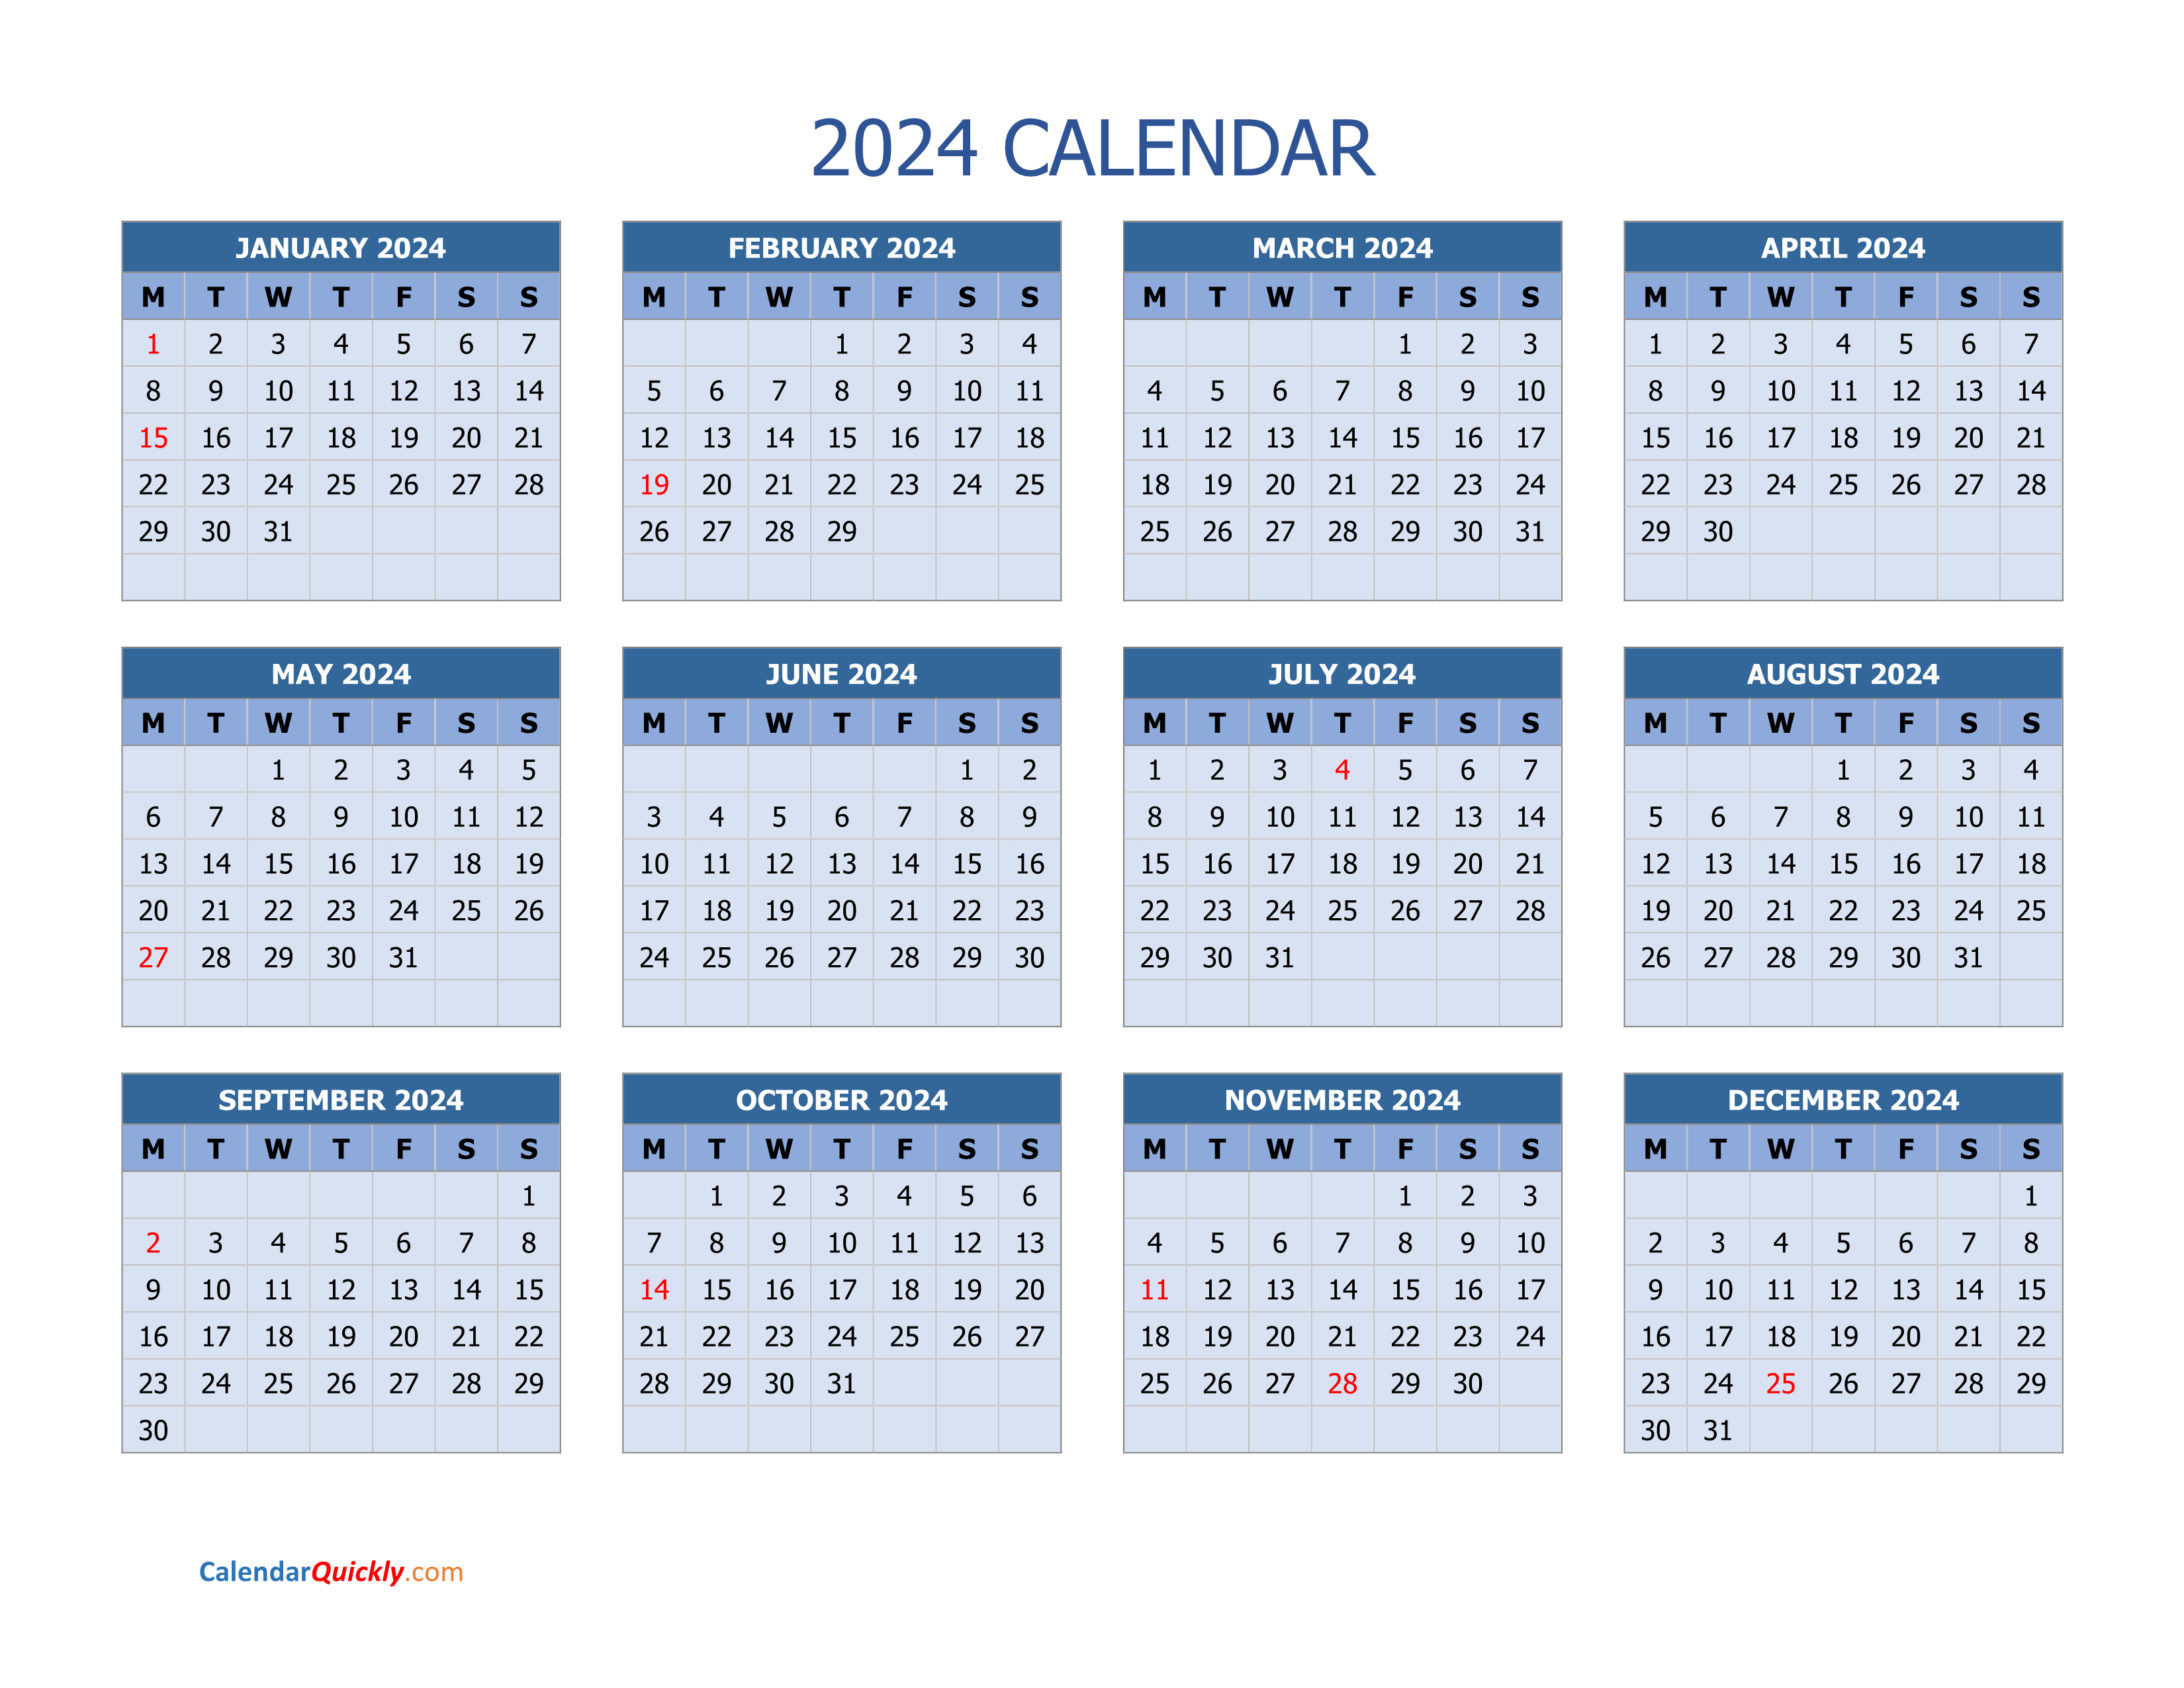 Calendar 2023 And 2024 On One Page Calendar Quickly All in one Photos